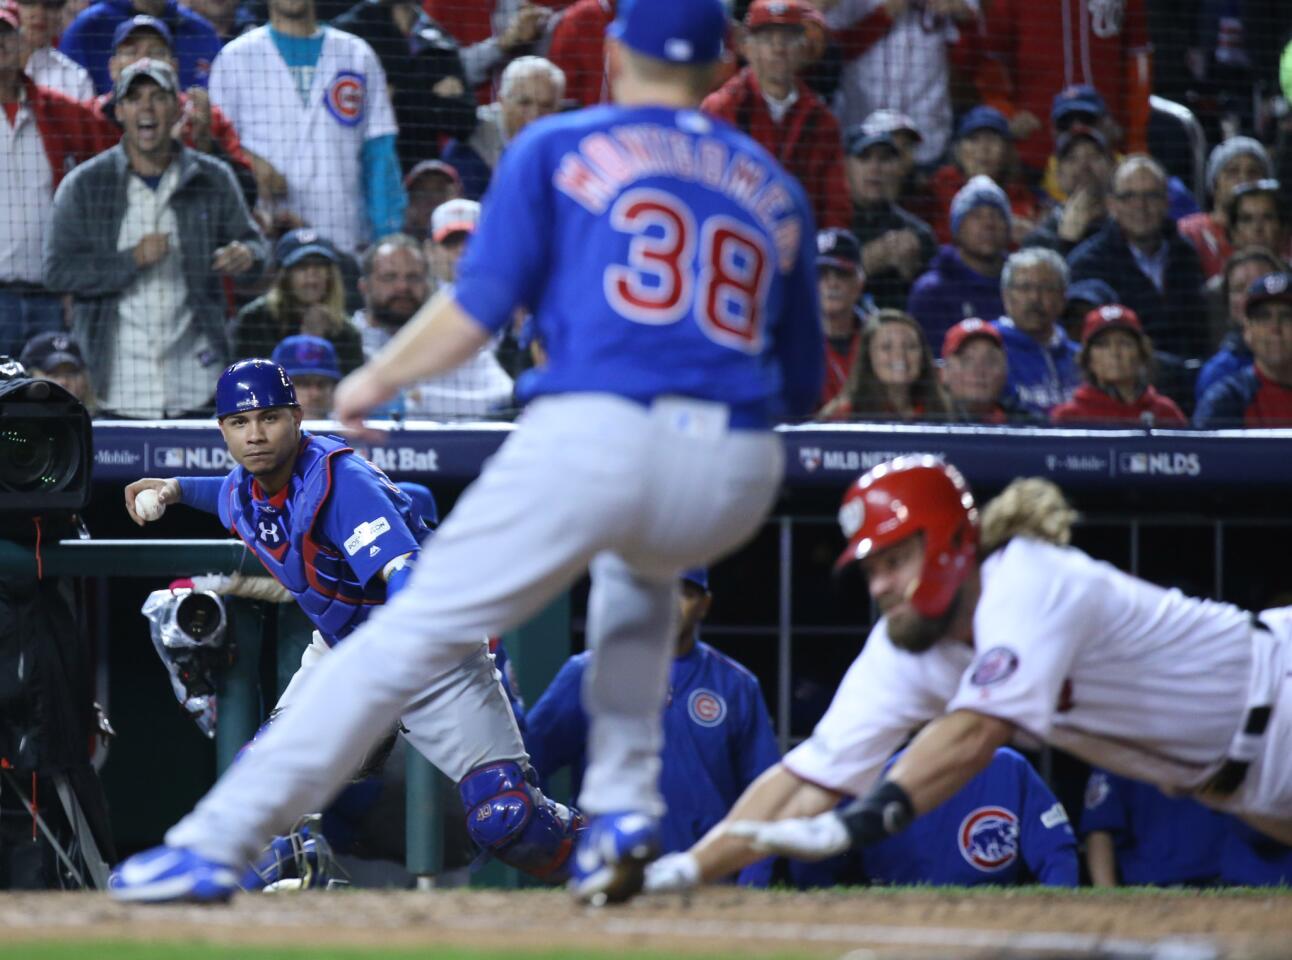 ct-nlds-game-5-cubs-at-nationals-photos-201710-050